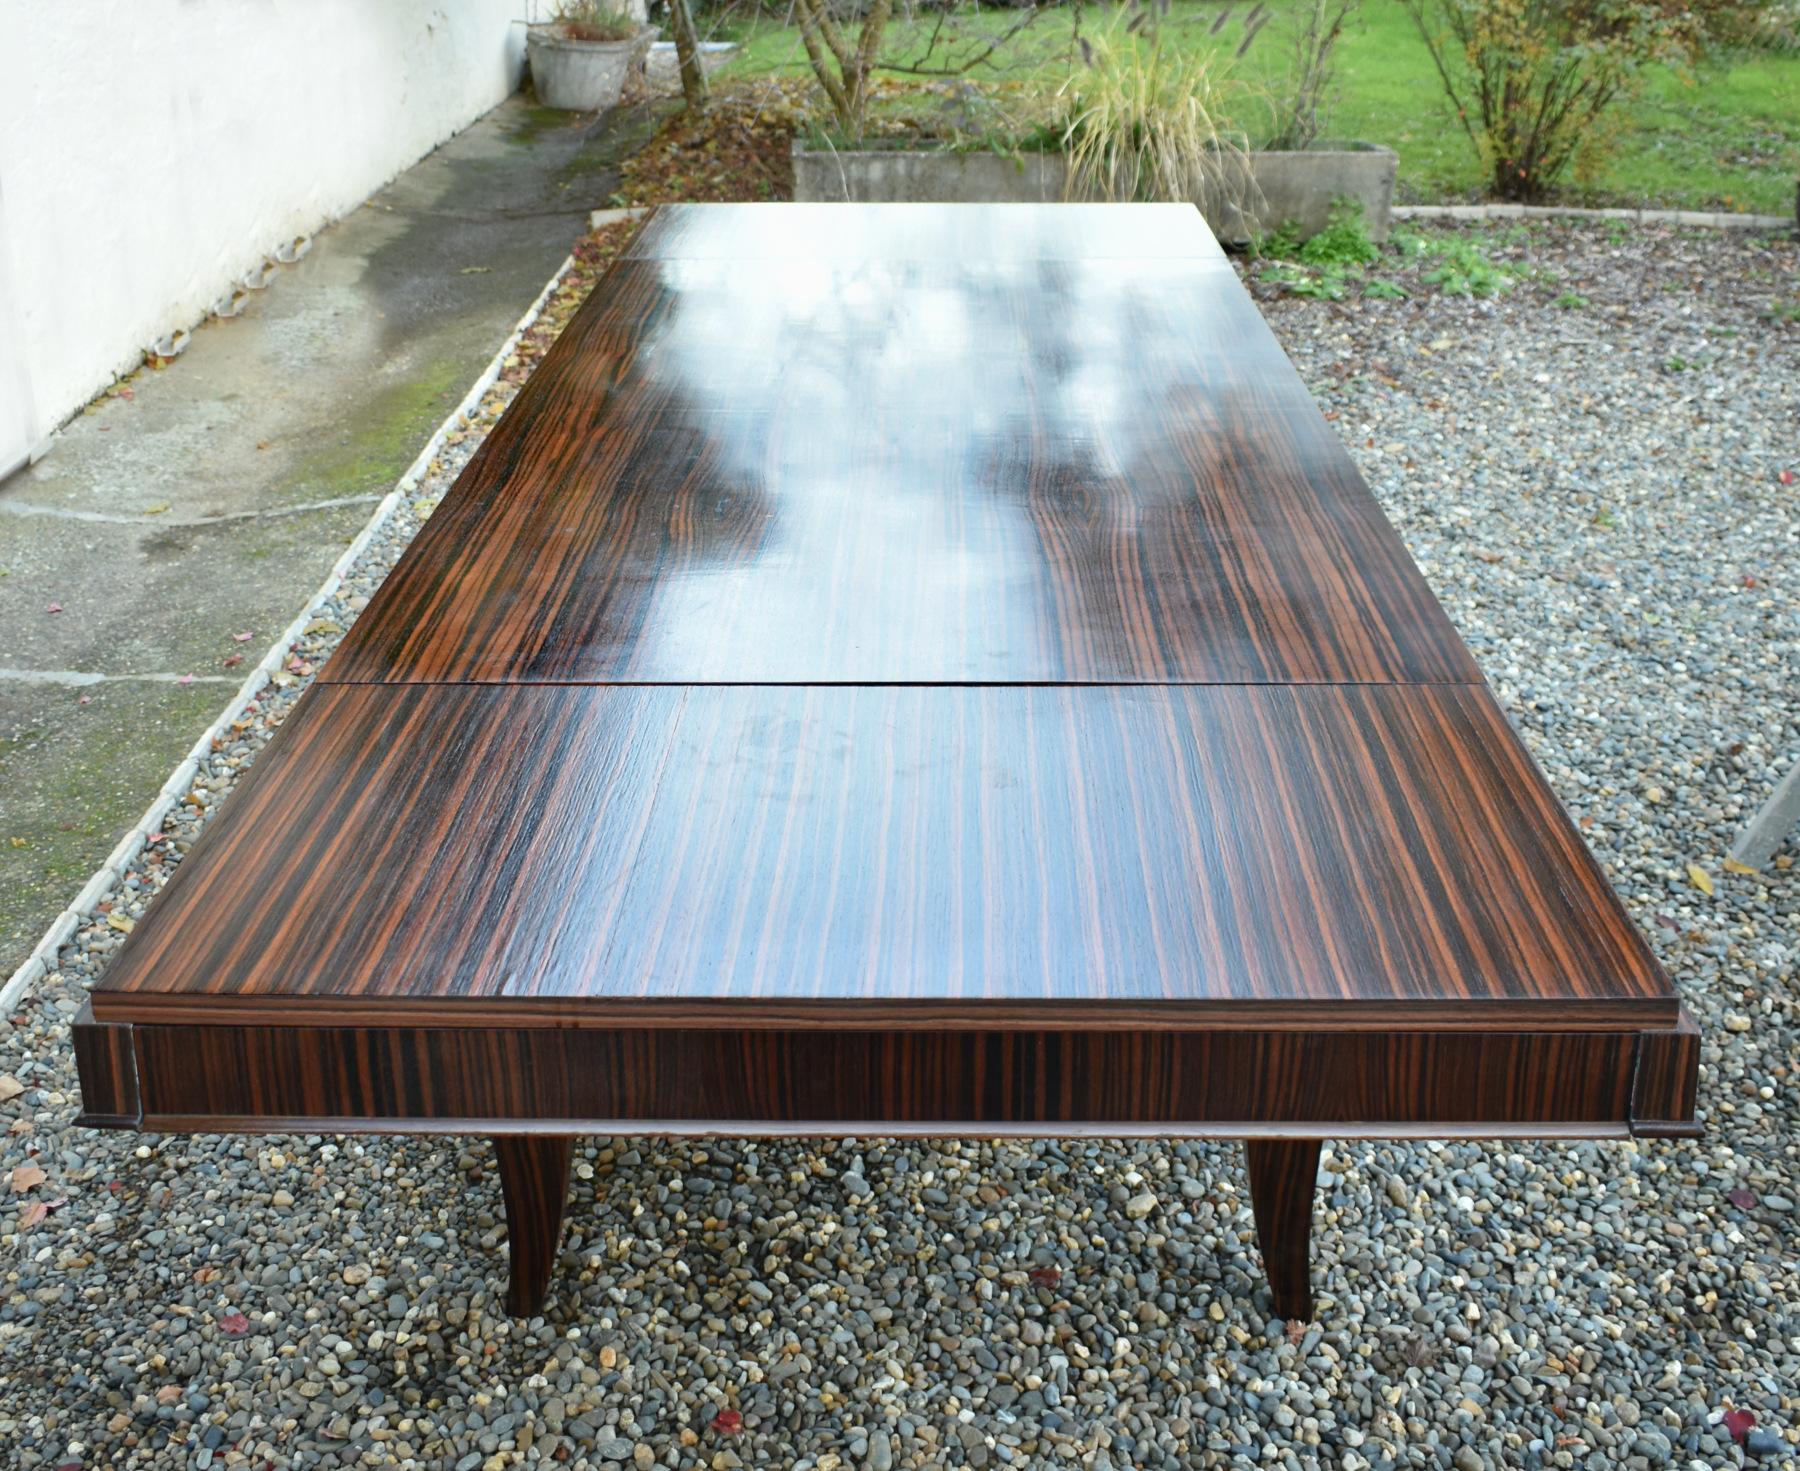 Polished Impressive French Macassar Ebony Dining Table Art Deco Style For Sale